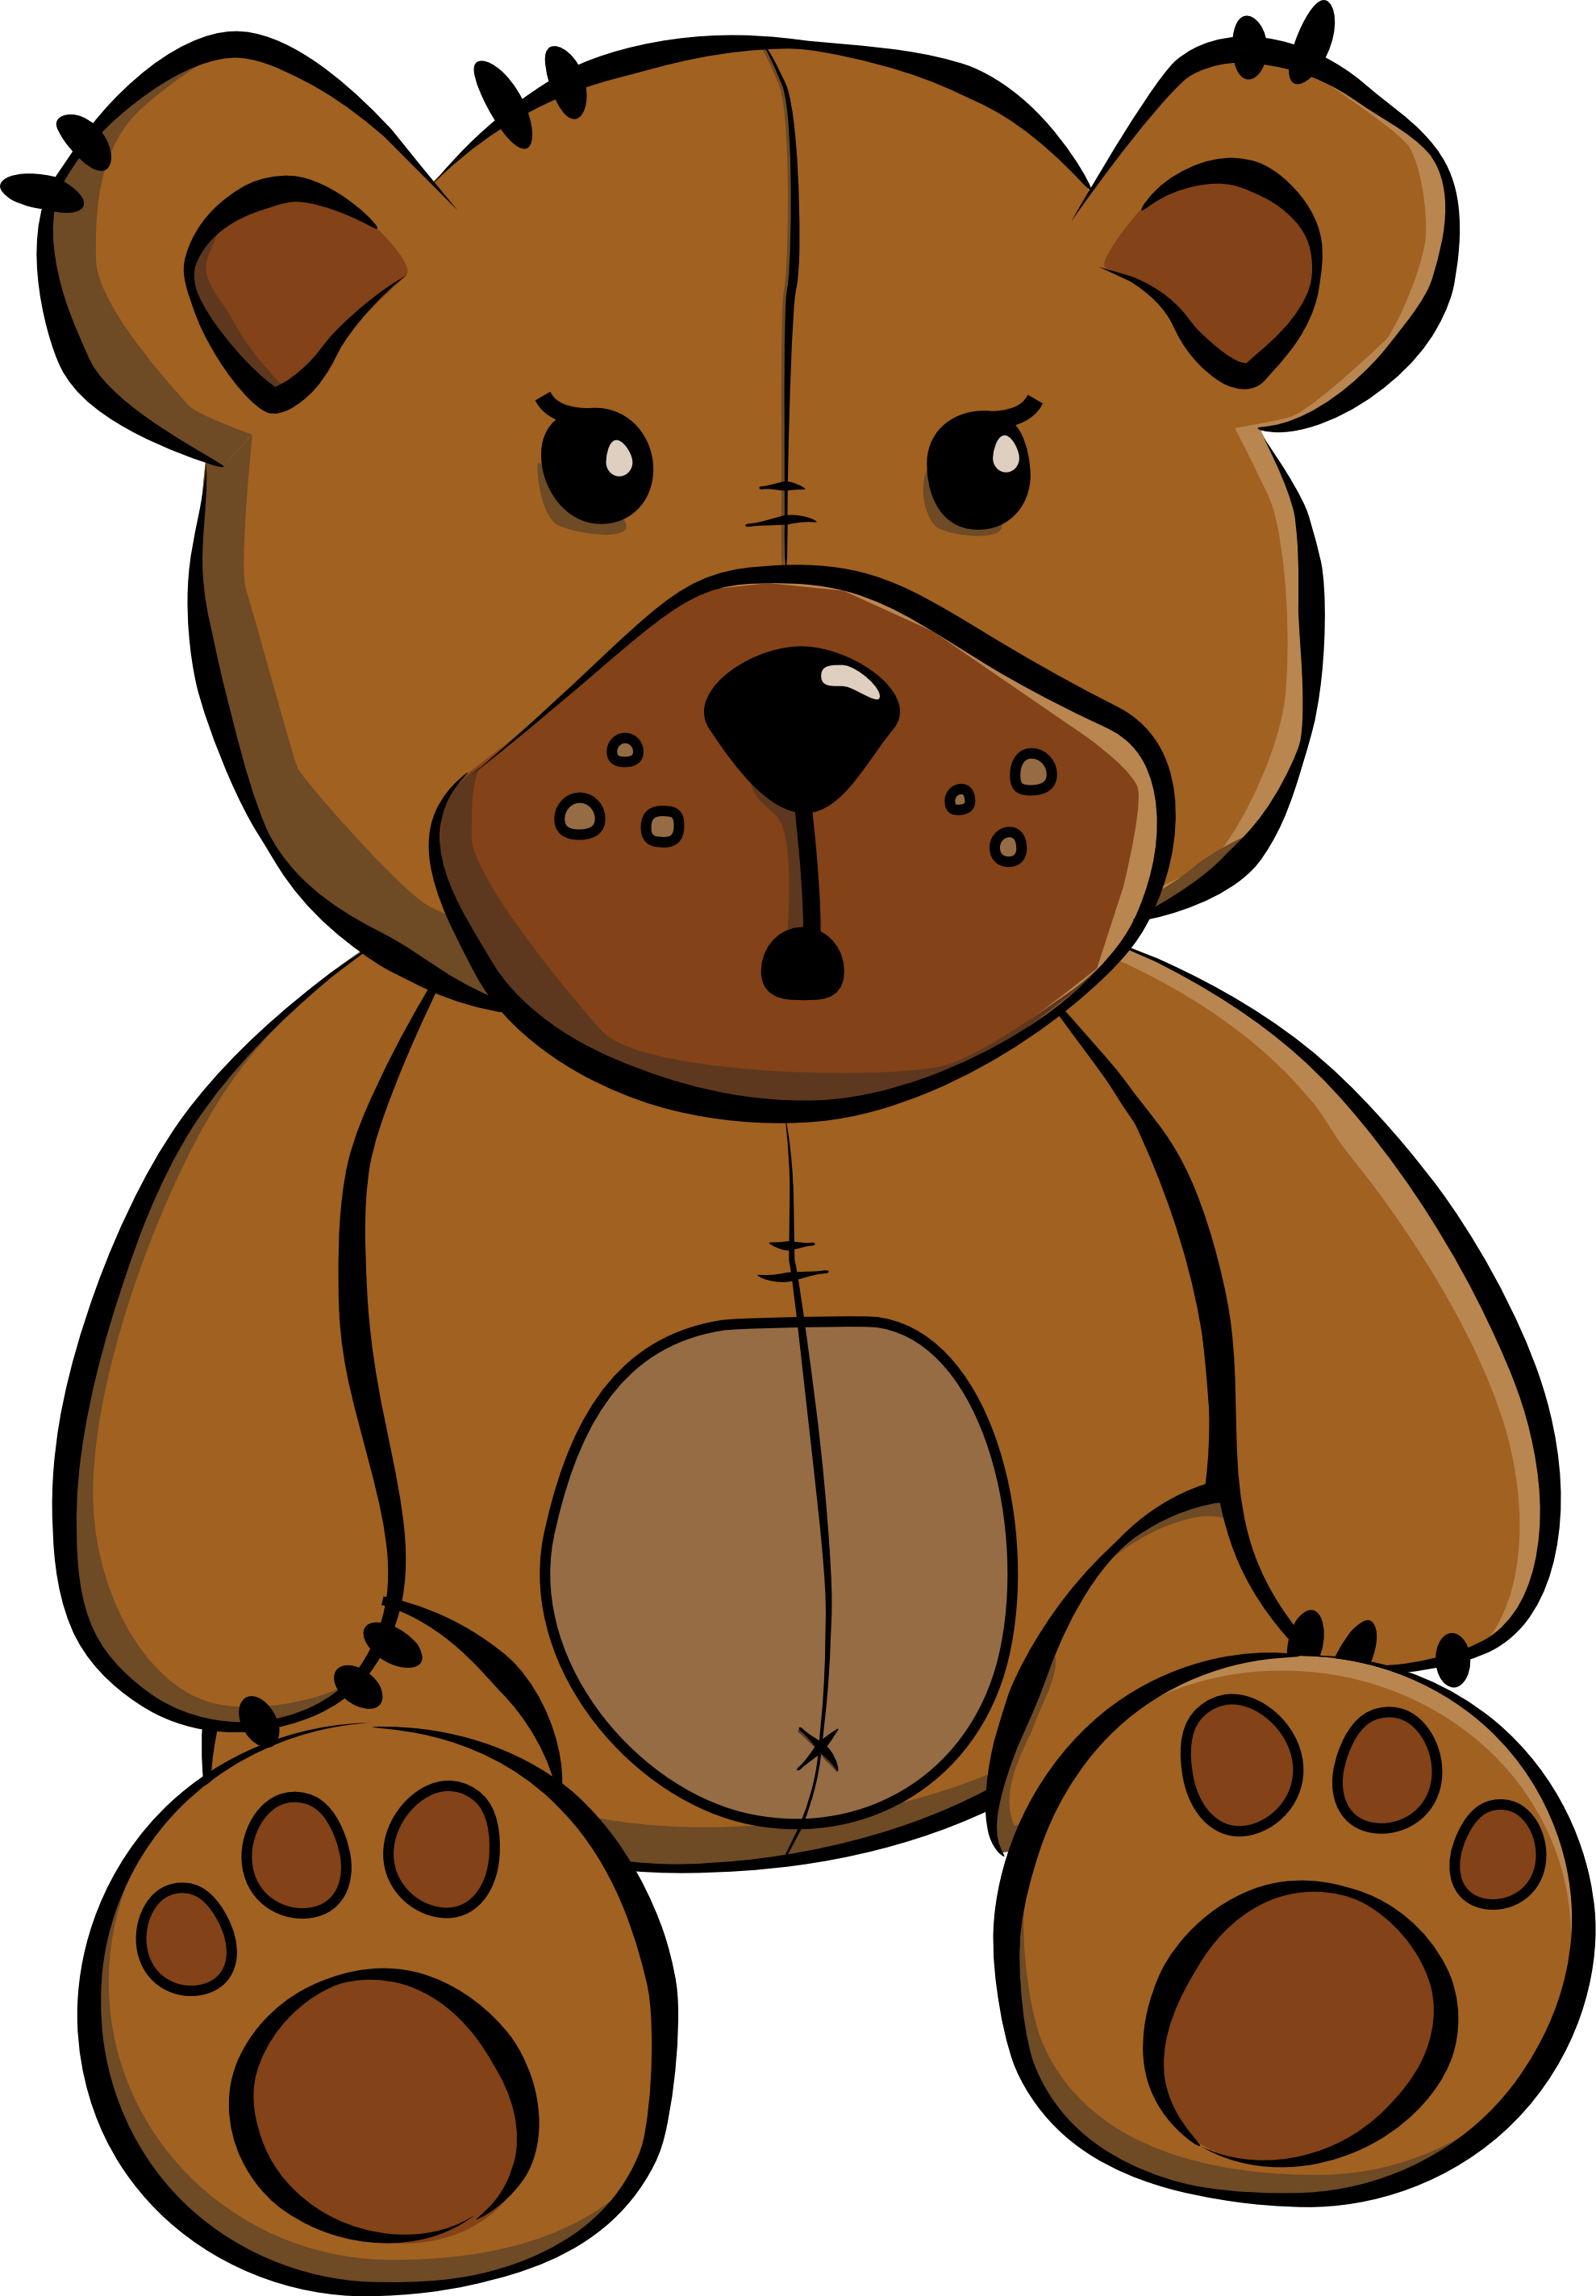 Bear png free images. Penguin clipart stuffed animal